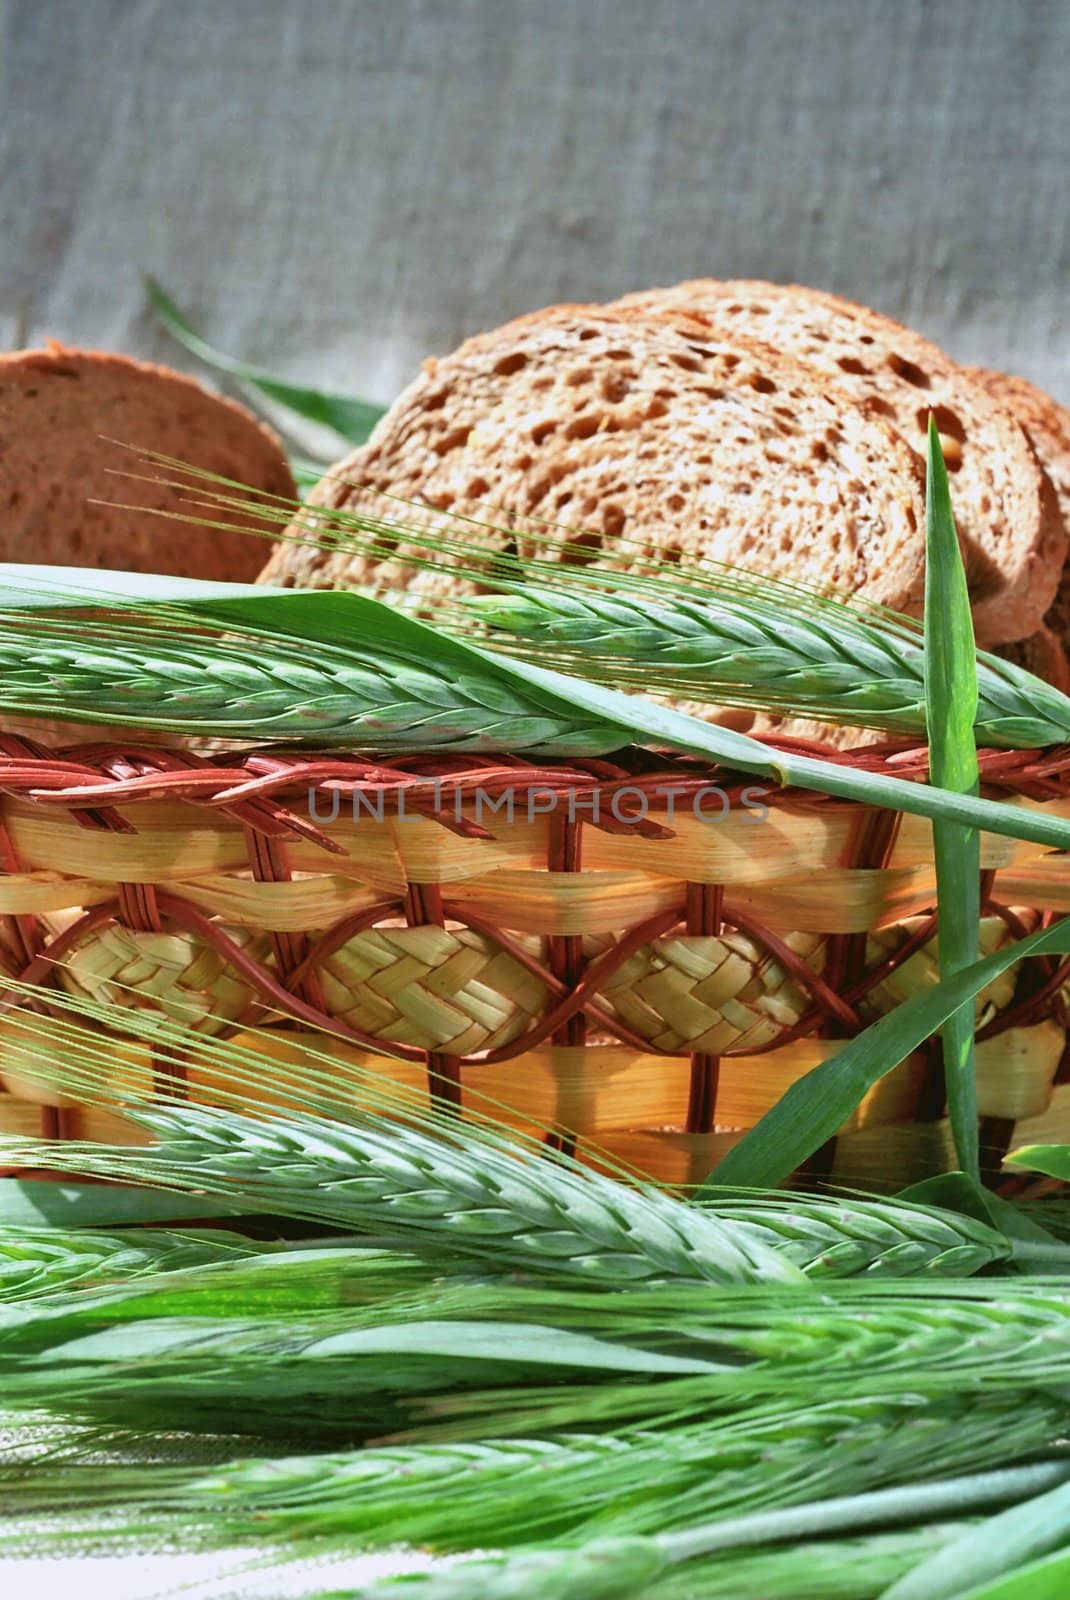 Spicas of rye and bread slices in basket